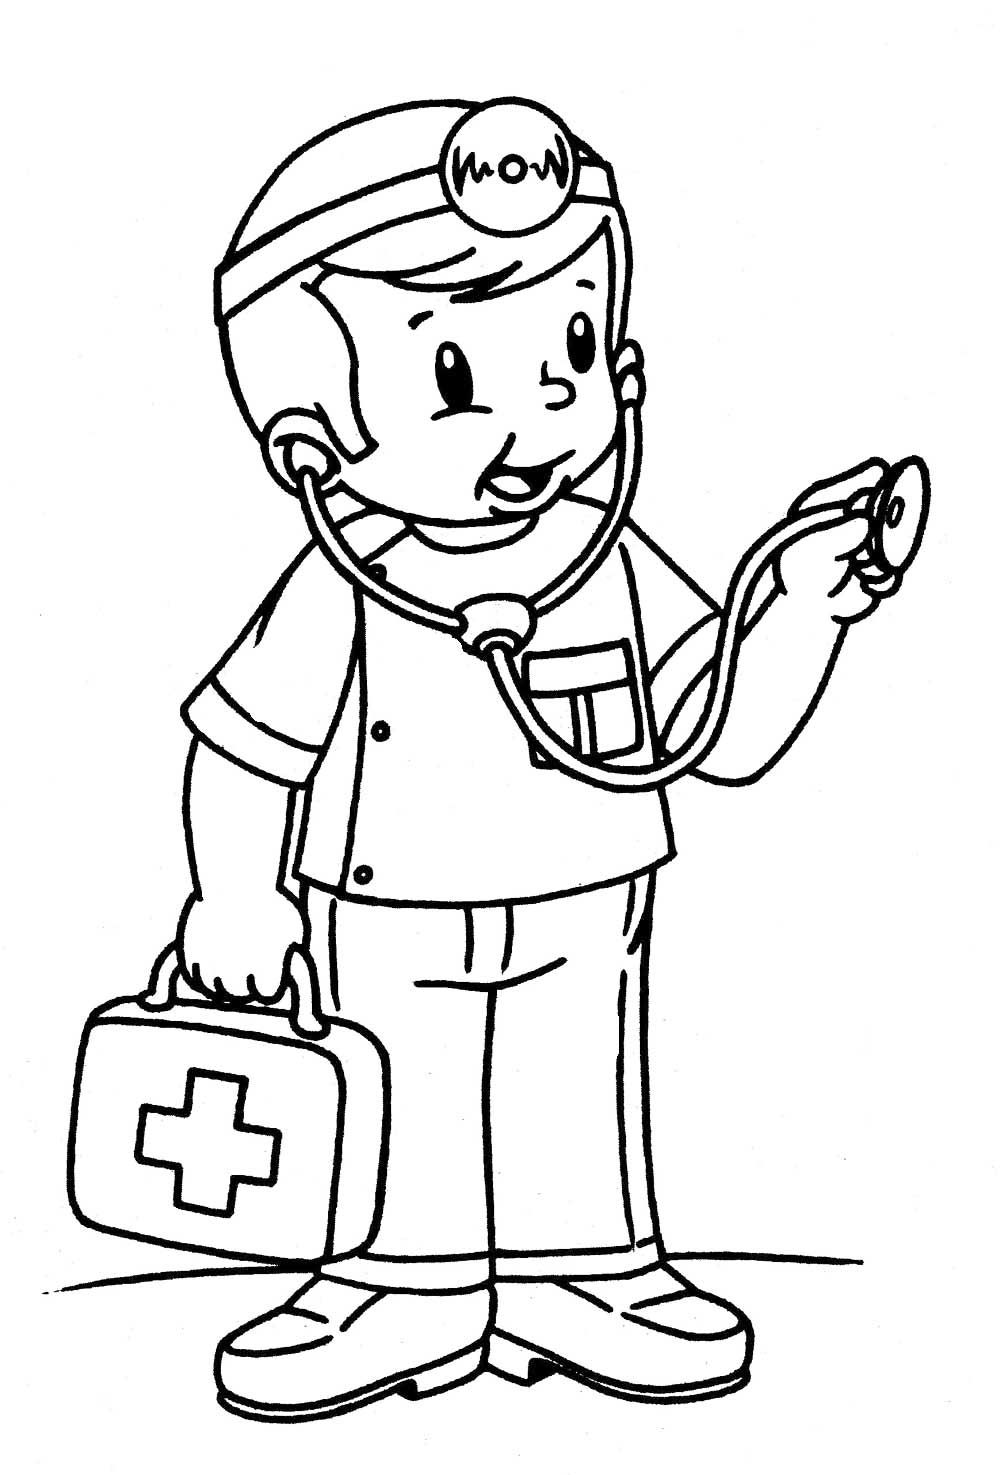 Cute Kid Doctor Coloring Page Free Printable Coloring Pages for Kids